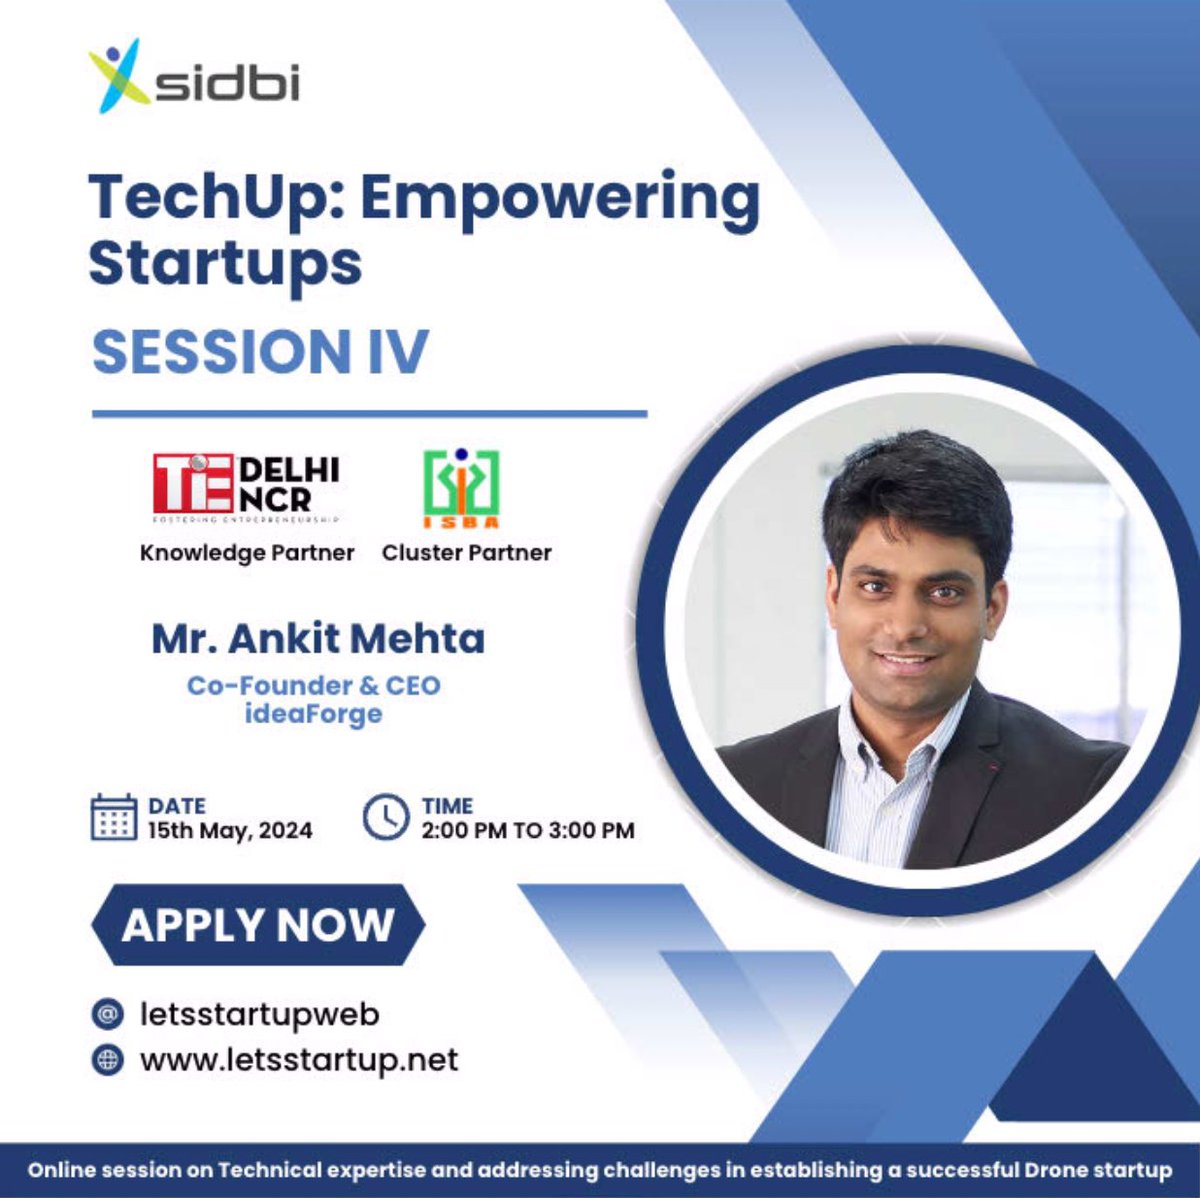 🚀 Exciting news! We are back with yet another exciting session under the 'TechUp: Empowering Startups' series featuring Mr. Ankit Mehta, CEO of ideaForge. Have burning questions about startups or venture challenges? Share them by May 13th, and Mr. Mehta will address them.